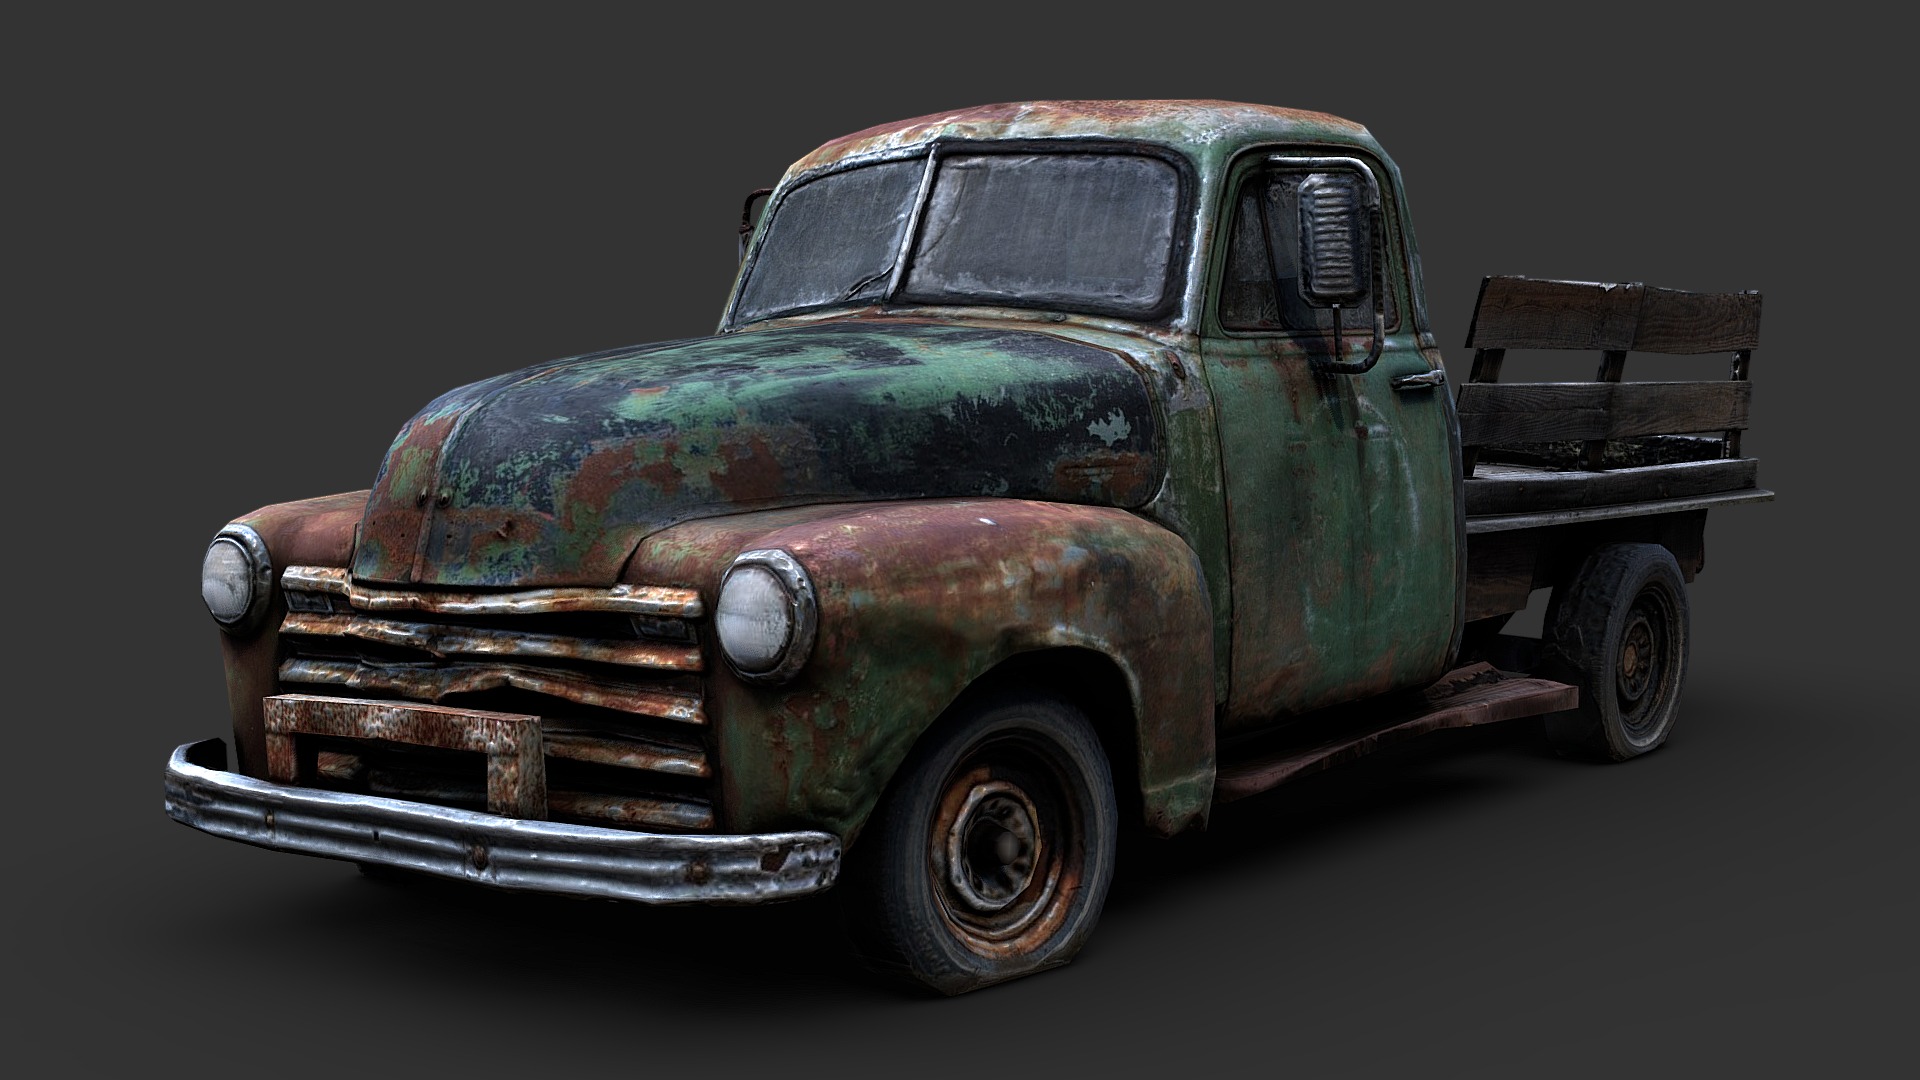 3D model Old Truck (Gameready from Scan) - This is a 3D model of the Old Truck (Gameready from Scan). The 3D model is about a green truck with a wooden crate on top.